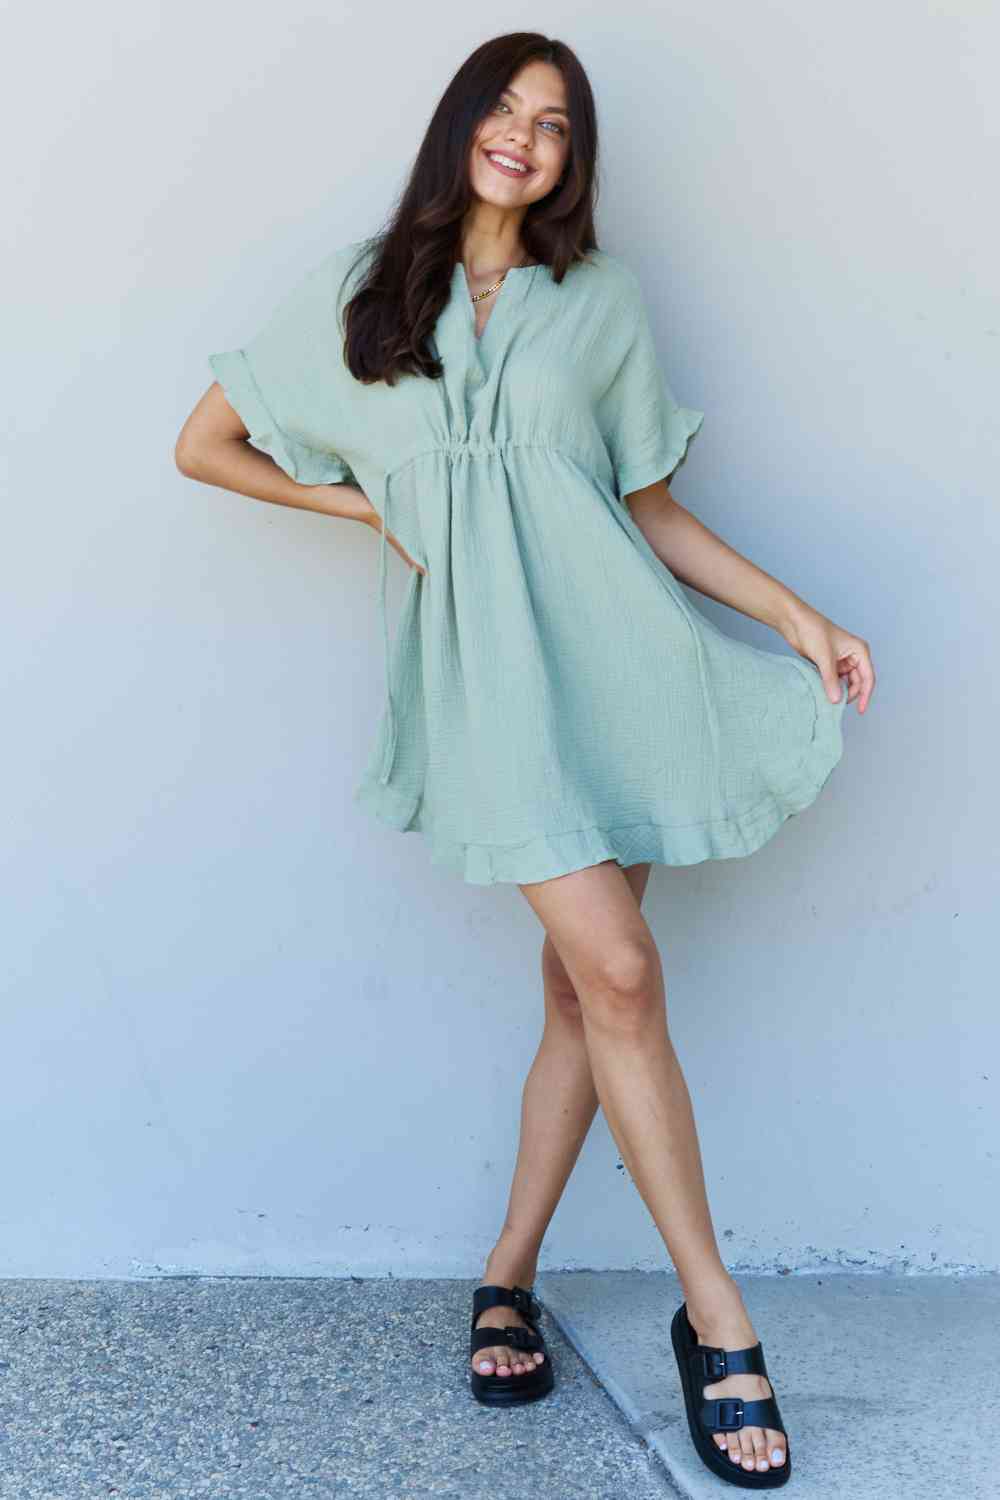 Ninexis Out Of Time Full Size Ruffle Hem Dress - Everyday-Sales.com